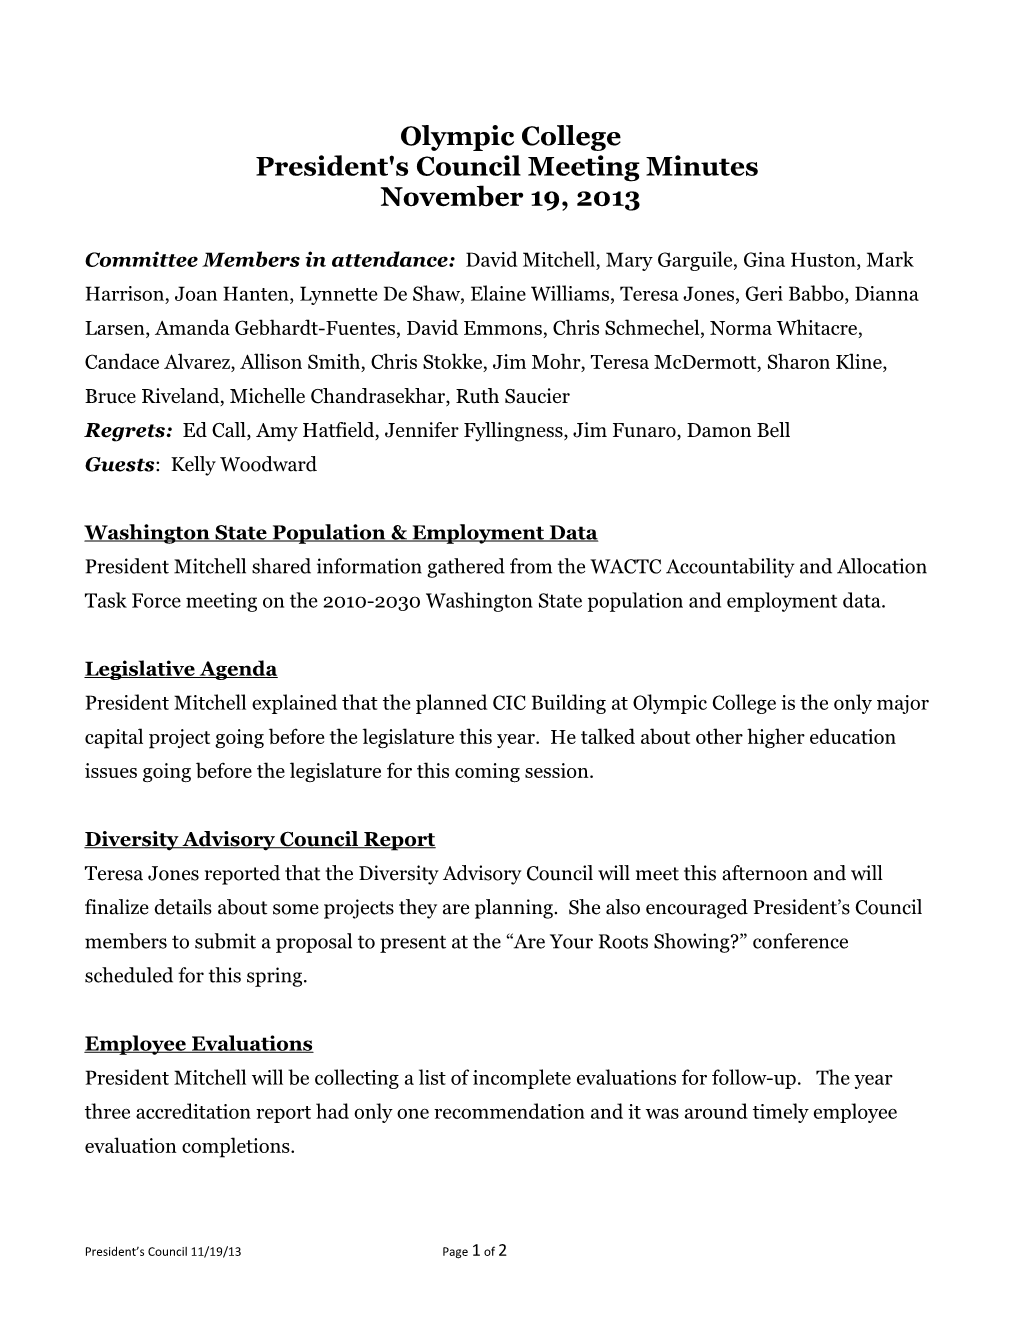 President's Council Meeting Minutes